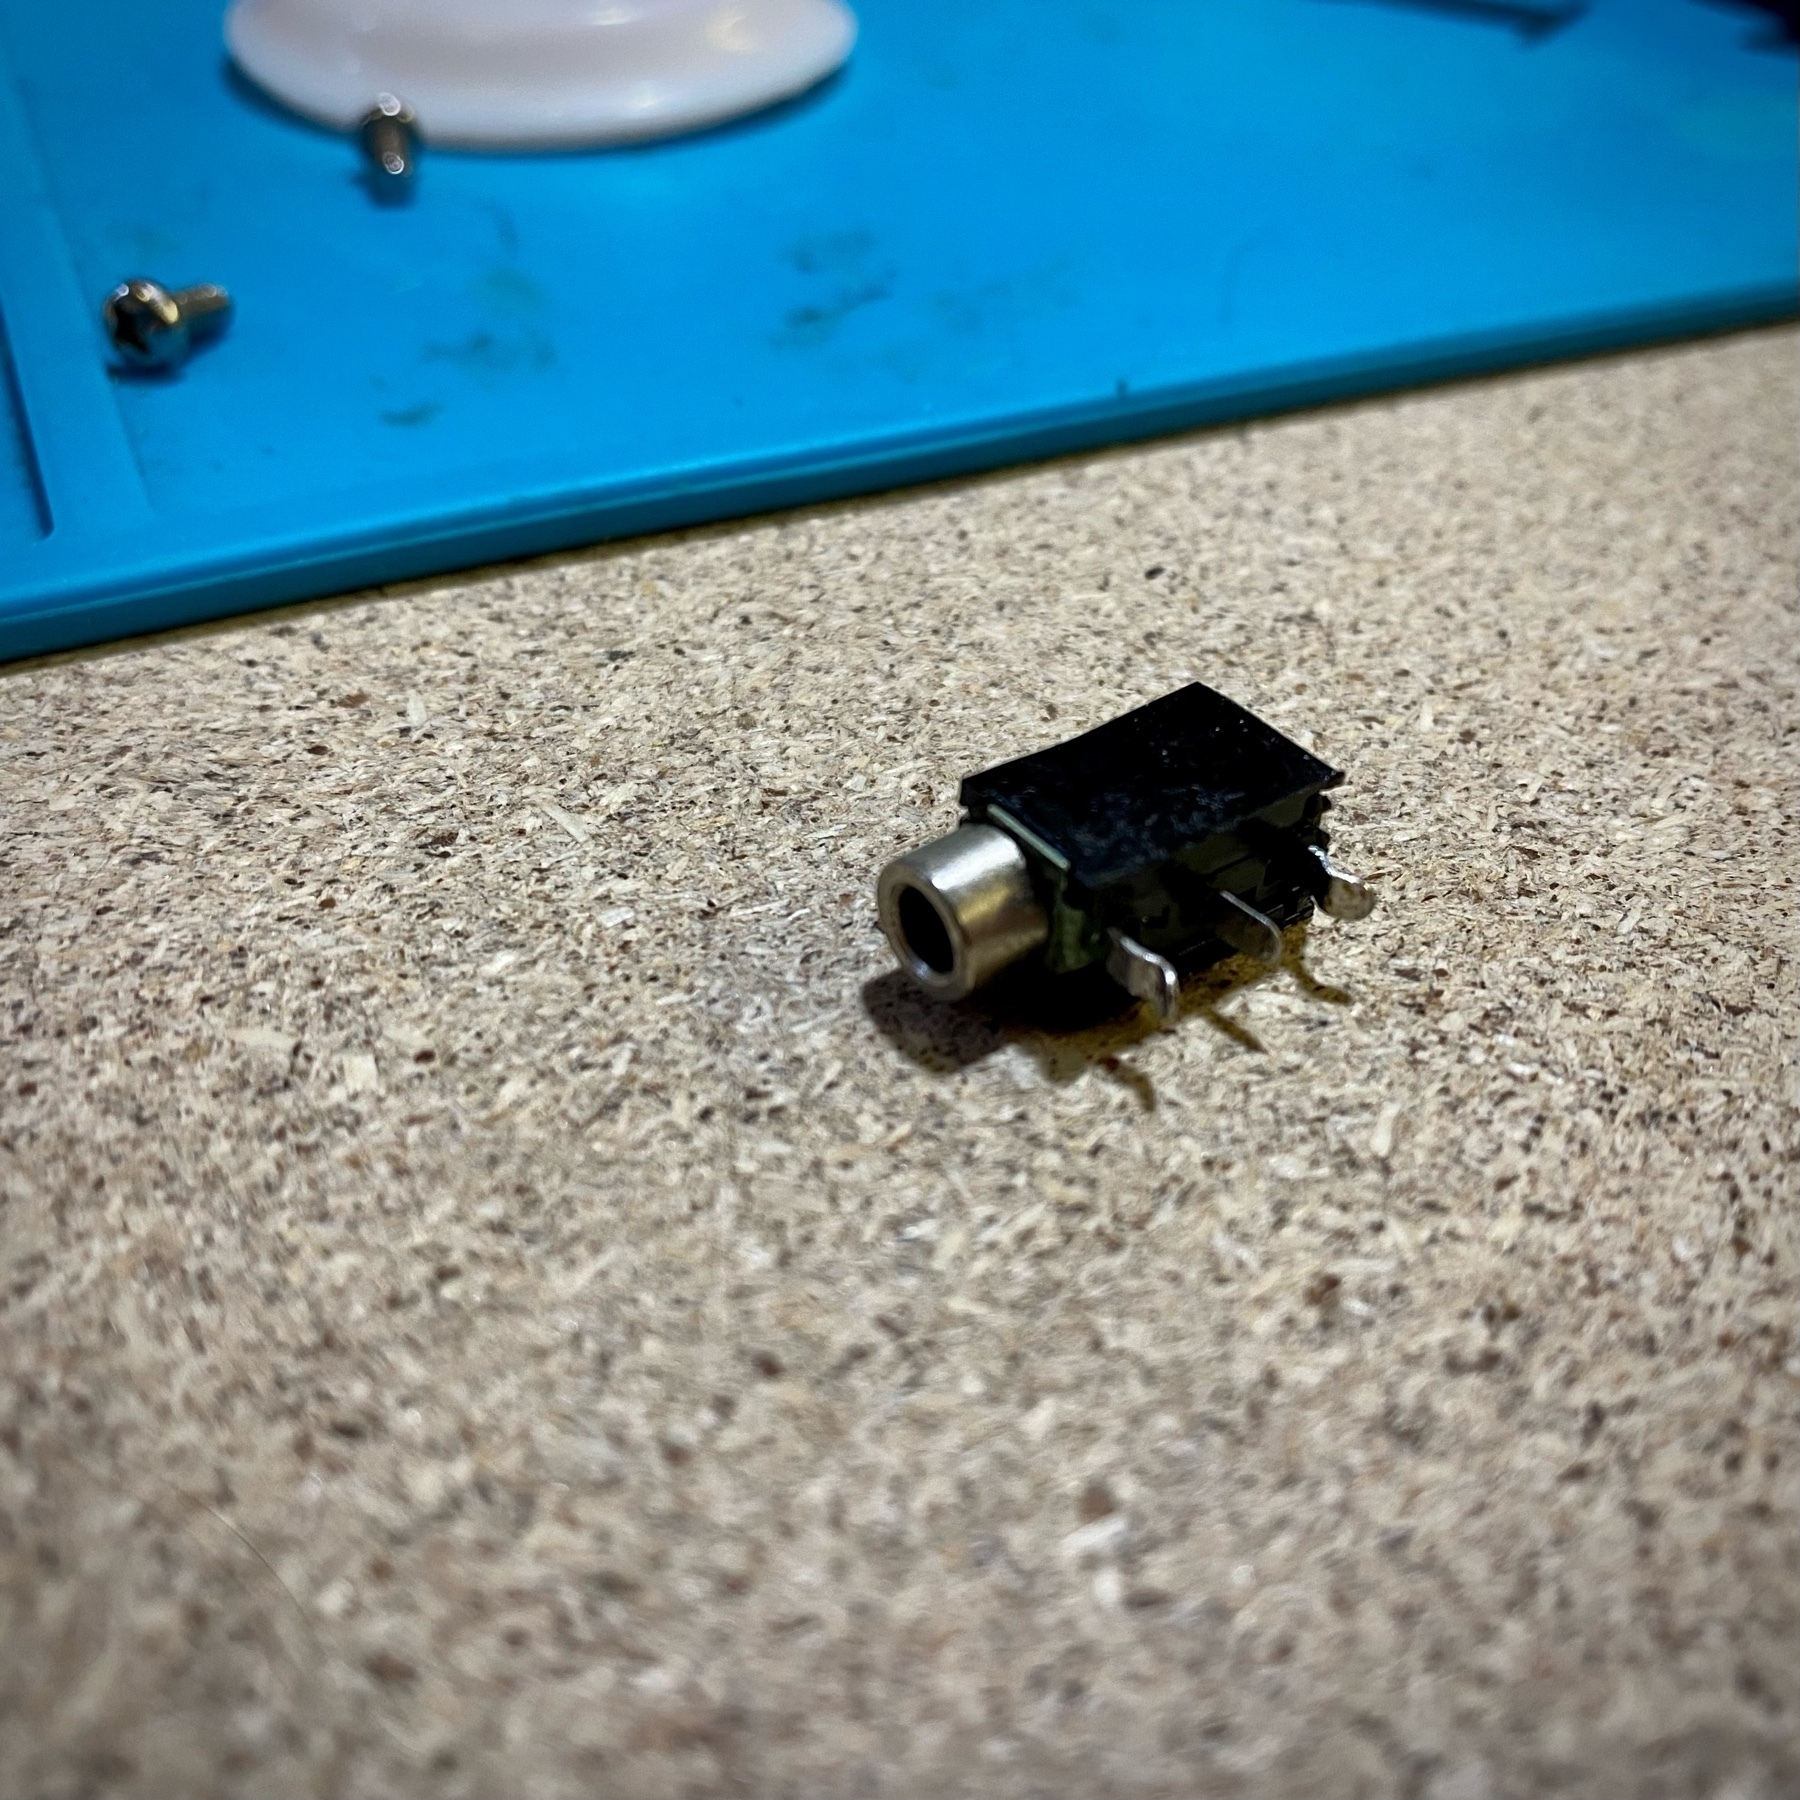 cracked stereo audio socket removed from SAM